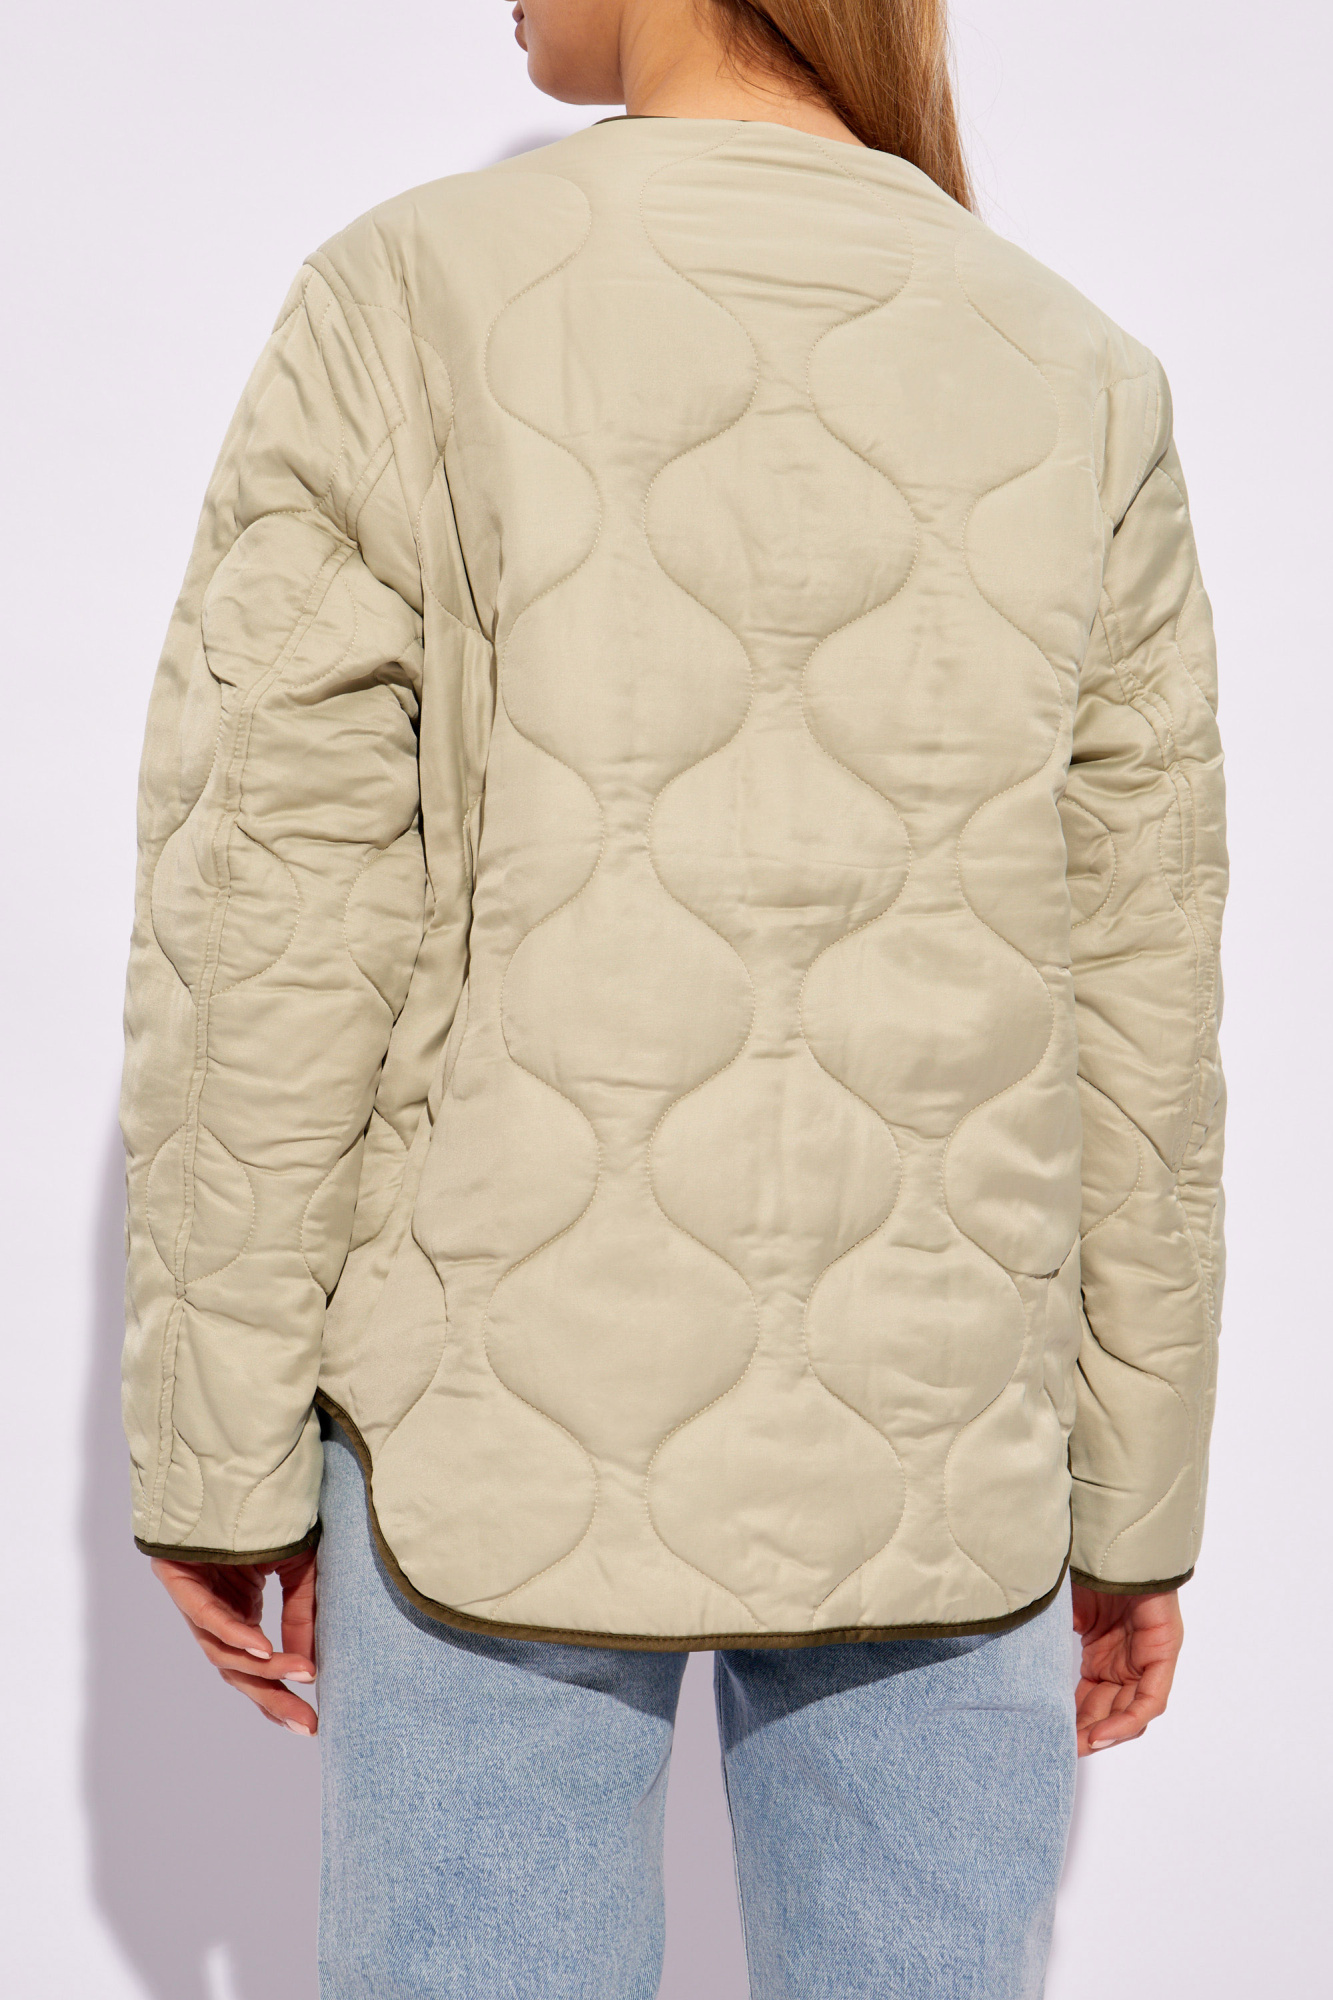 AllSaints ‘Foxi Liner’ quilted jacket